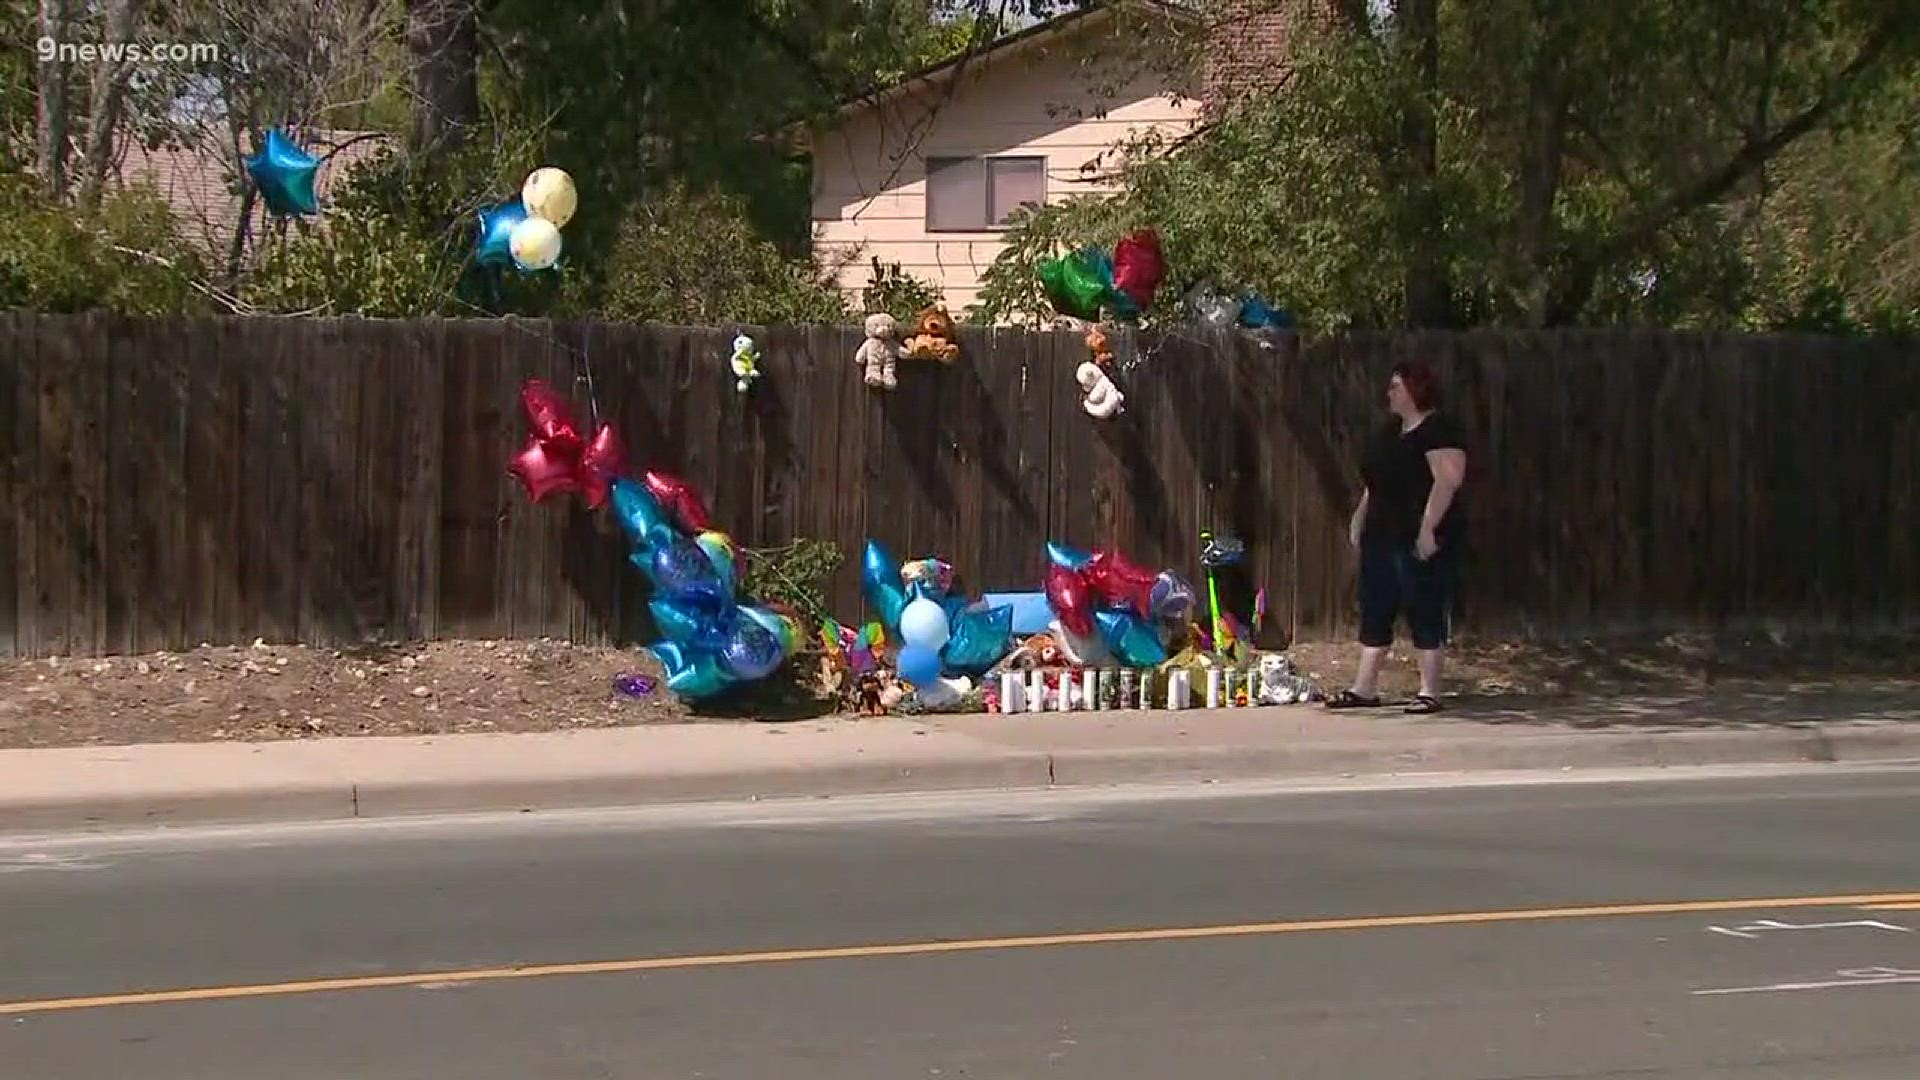 The young boy who was struck and killed by a parade float on Monday has been identified by the Weld County coroner as 8-year-old Brycen Zerby.